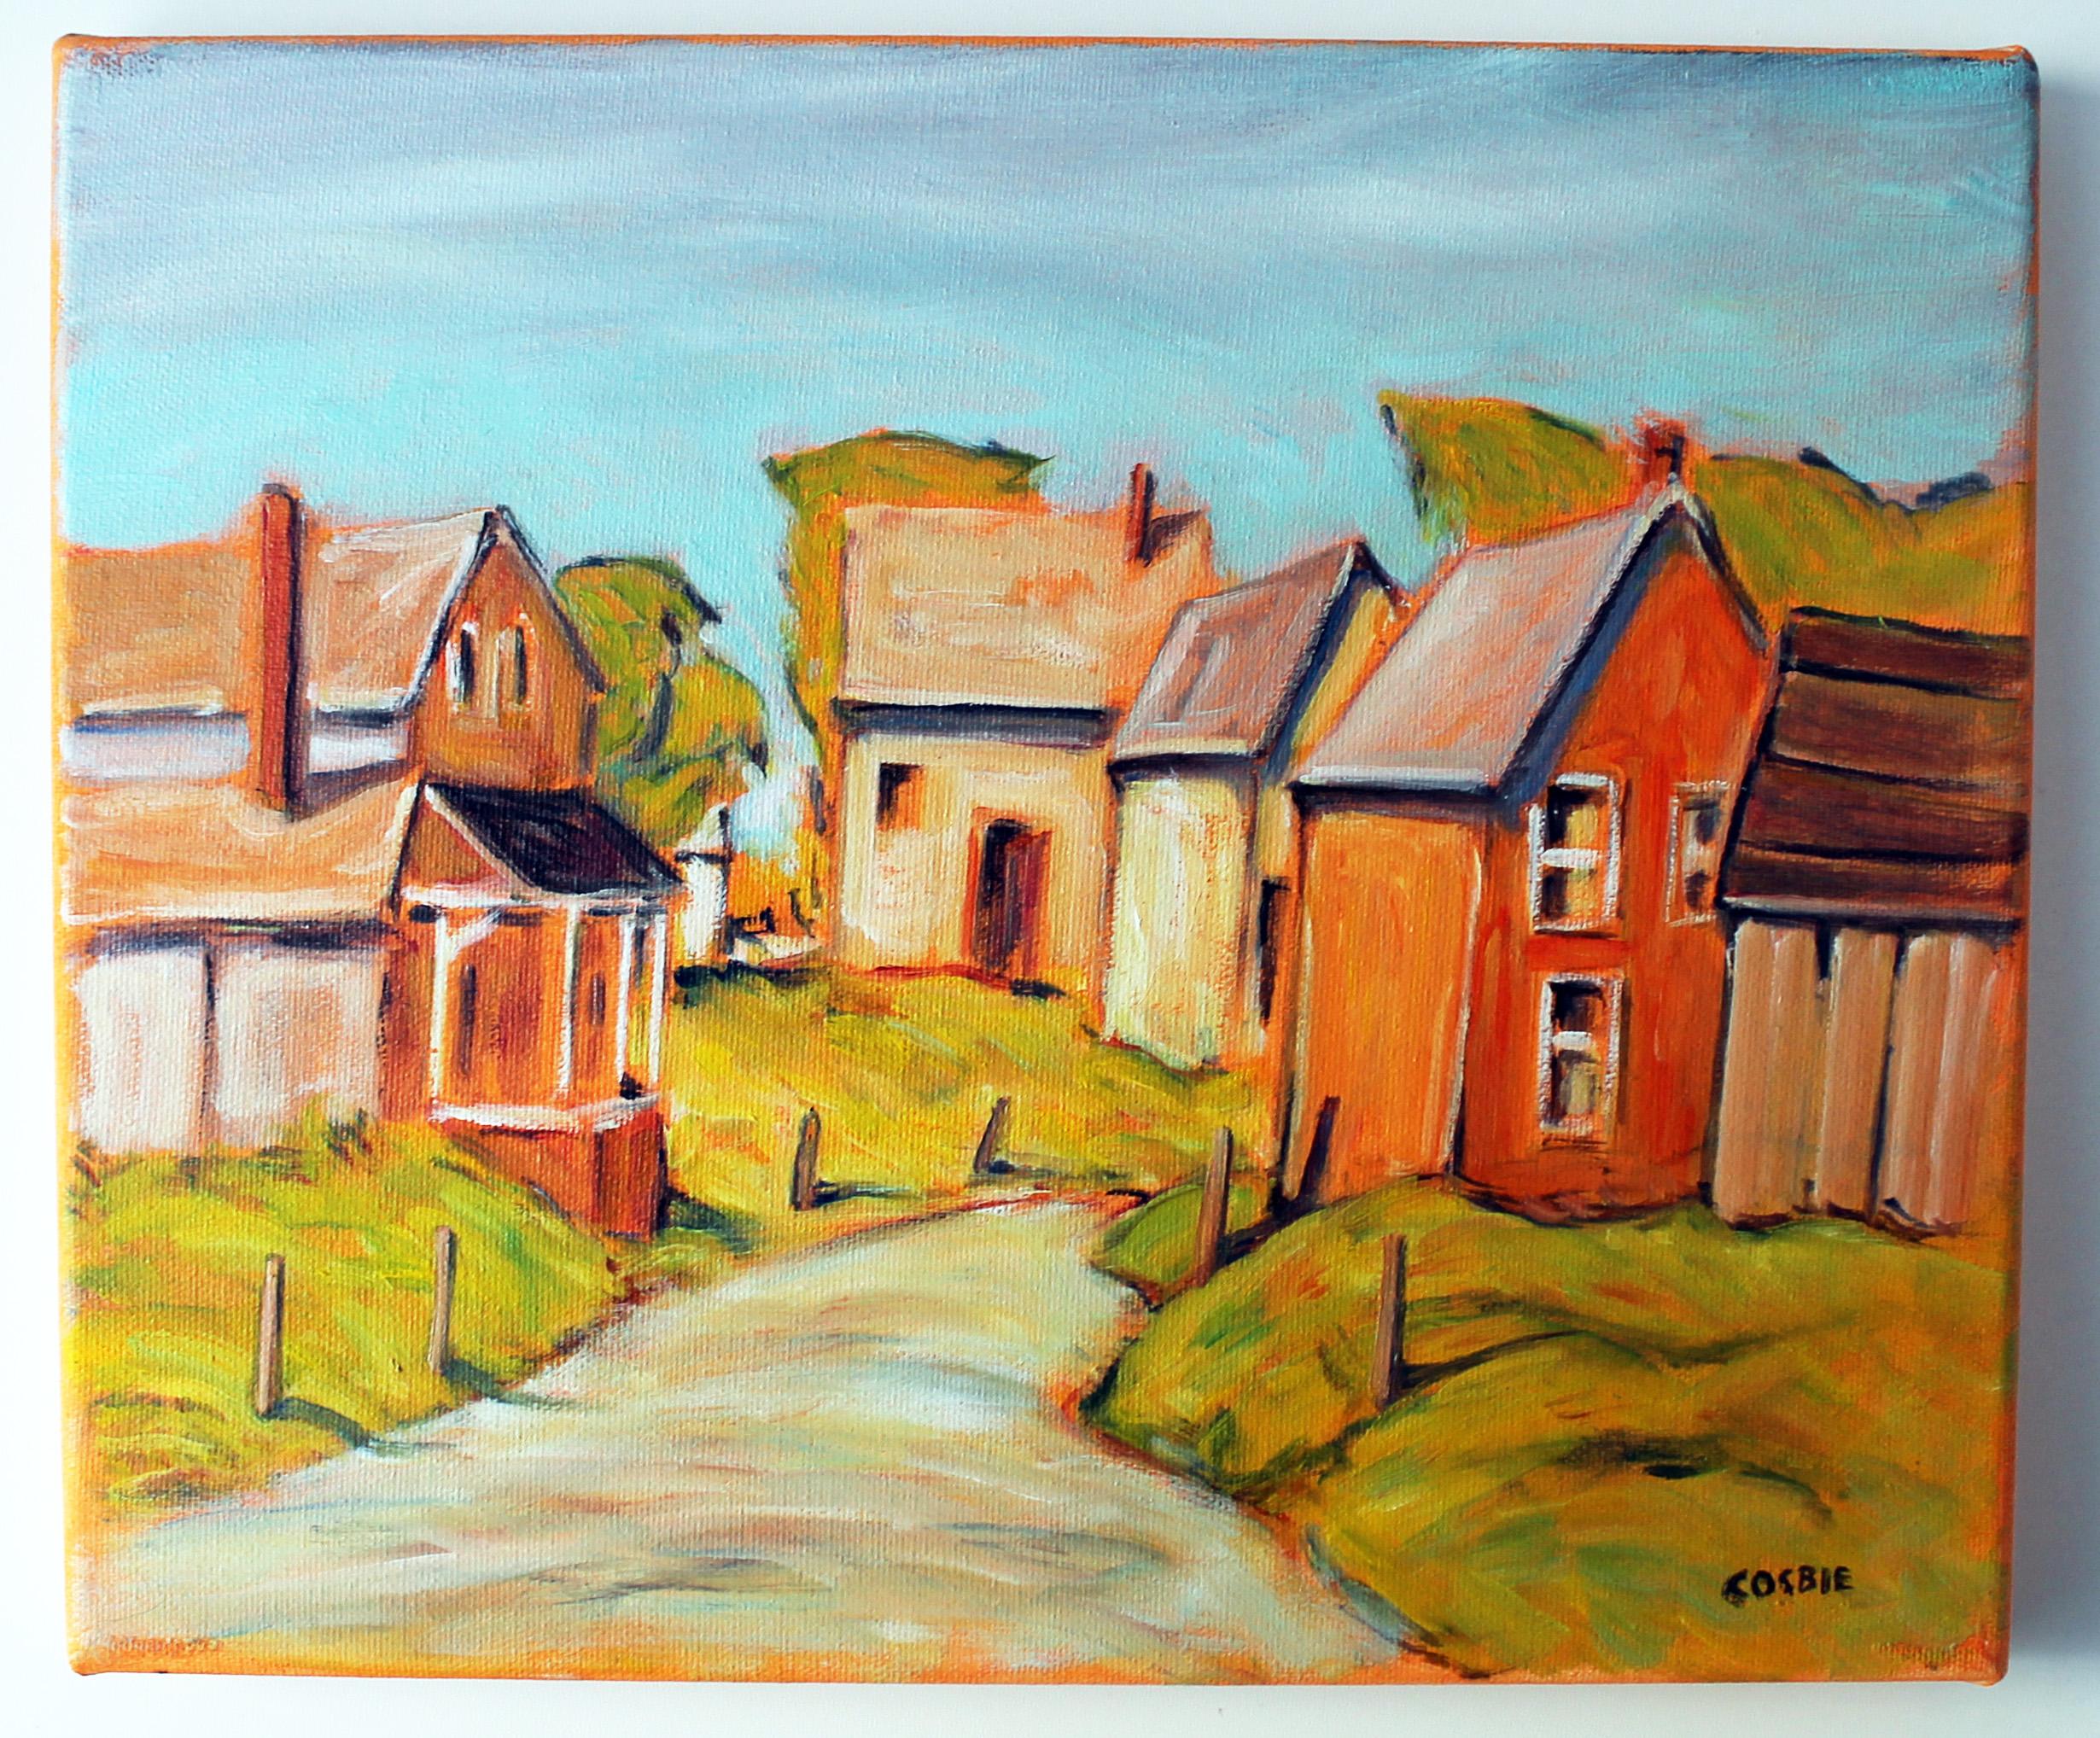 <p>Artist Comments<br>Houses and cottages dot a quiet street inspired by the township of Sterling in Ontario, Canada. Bathed in the warm sunlight, the setting comes to life with bold and vibrant colors. The composition reflects the nostalgic charm